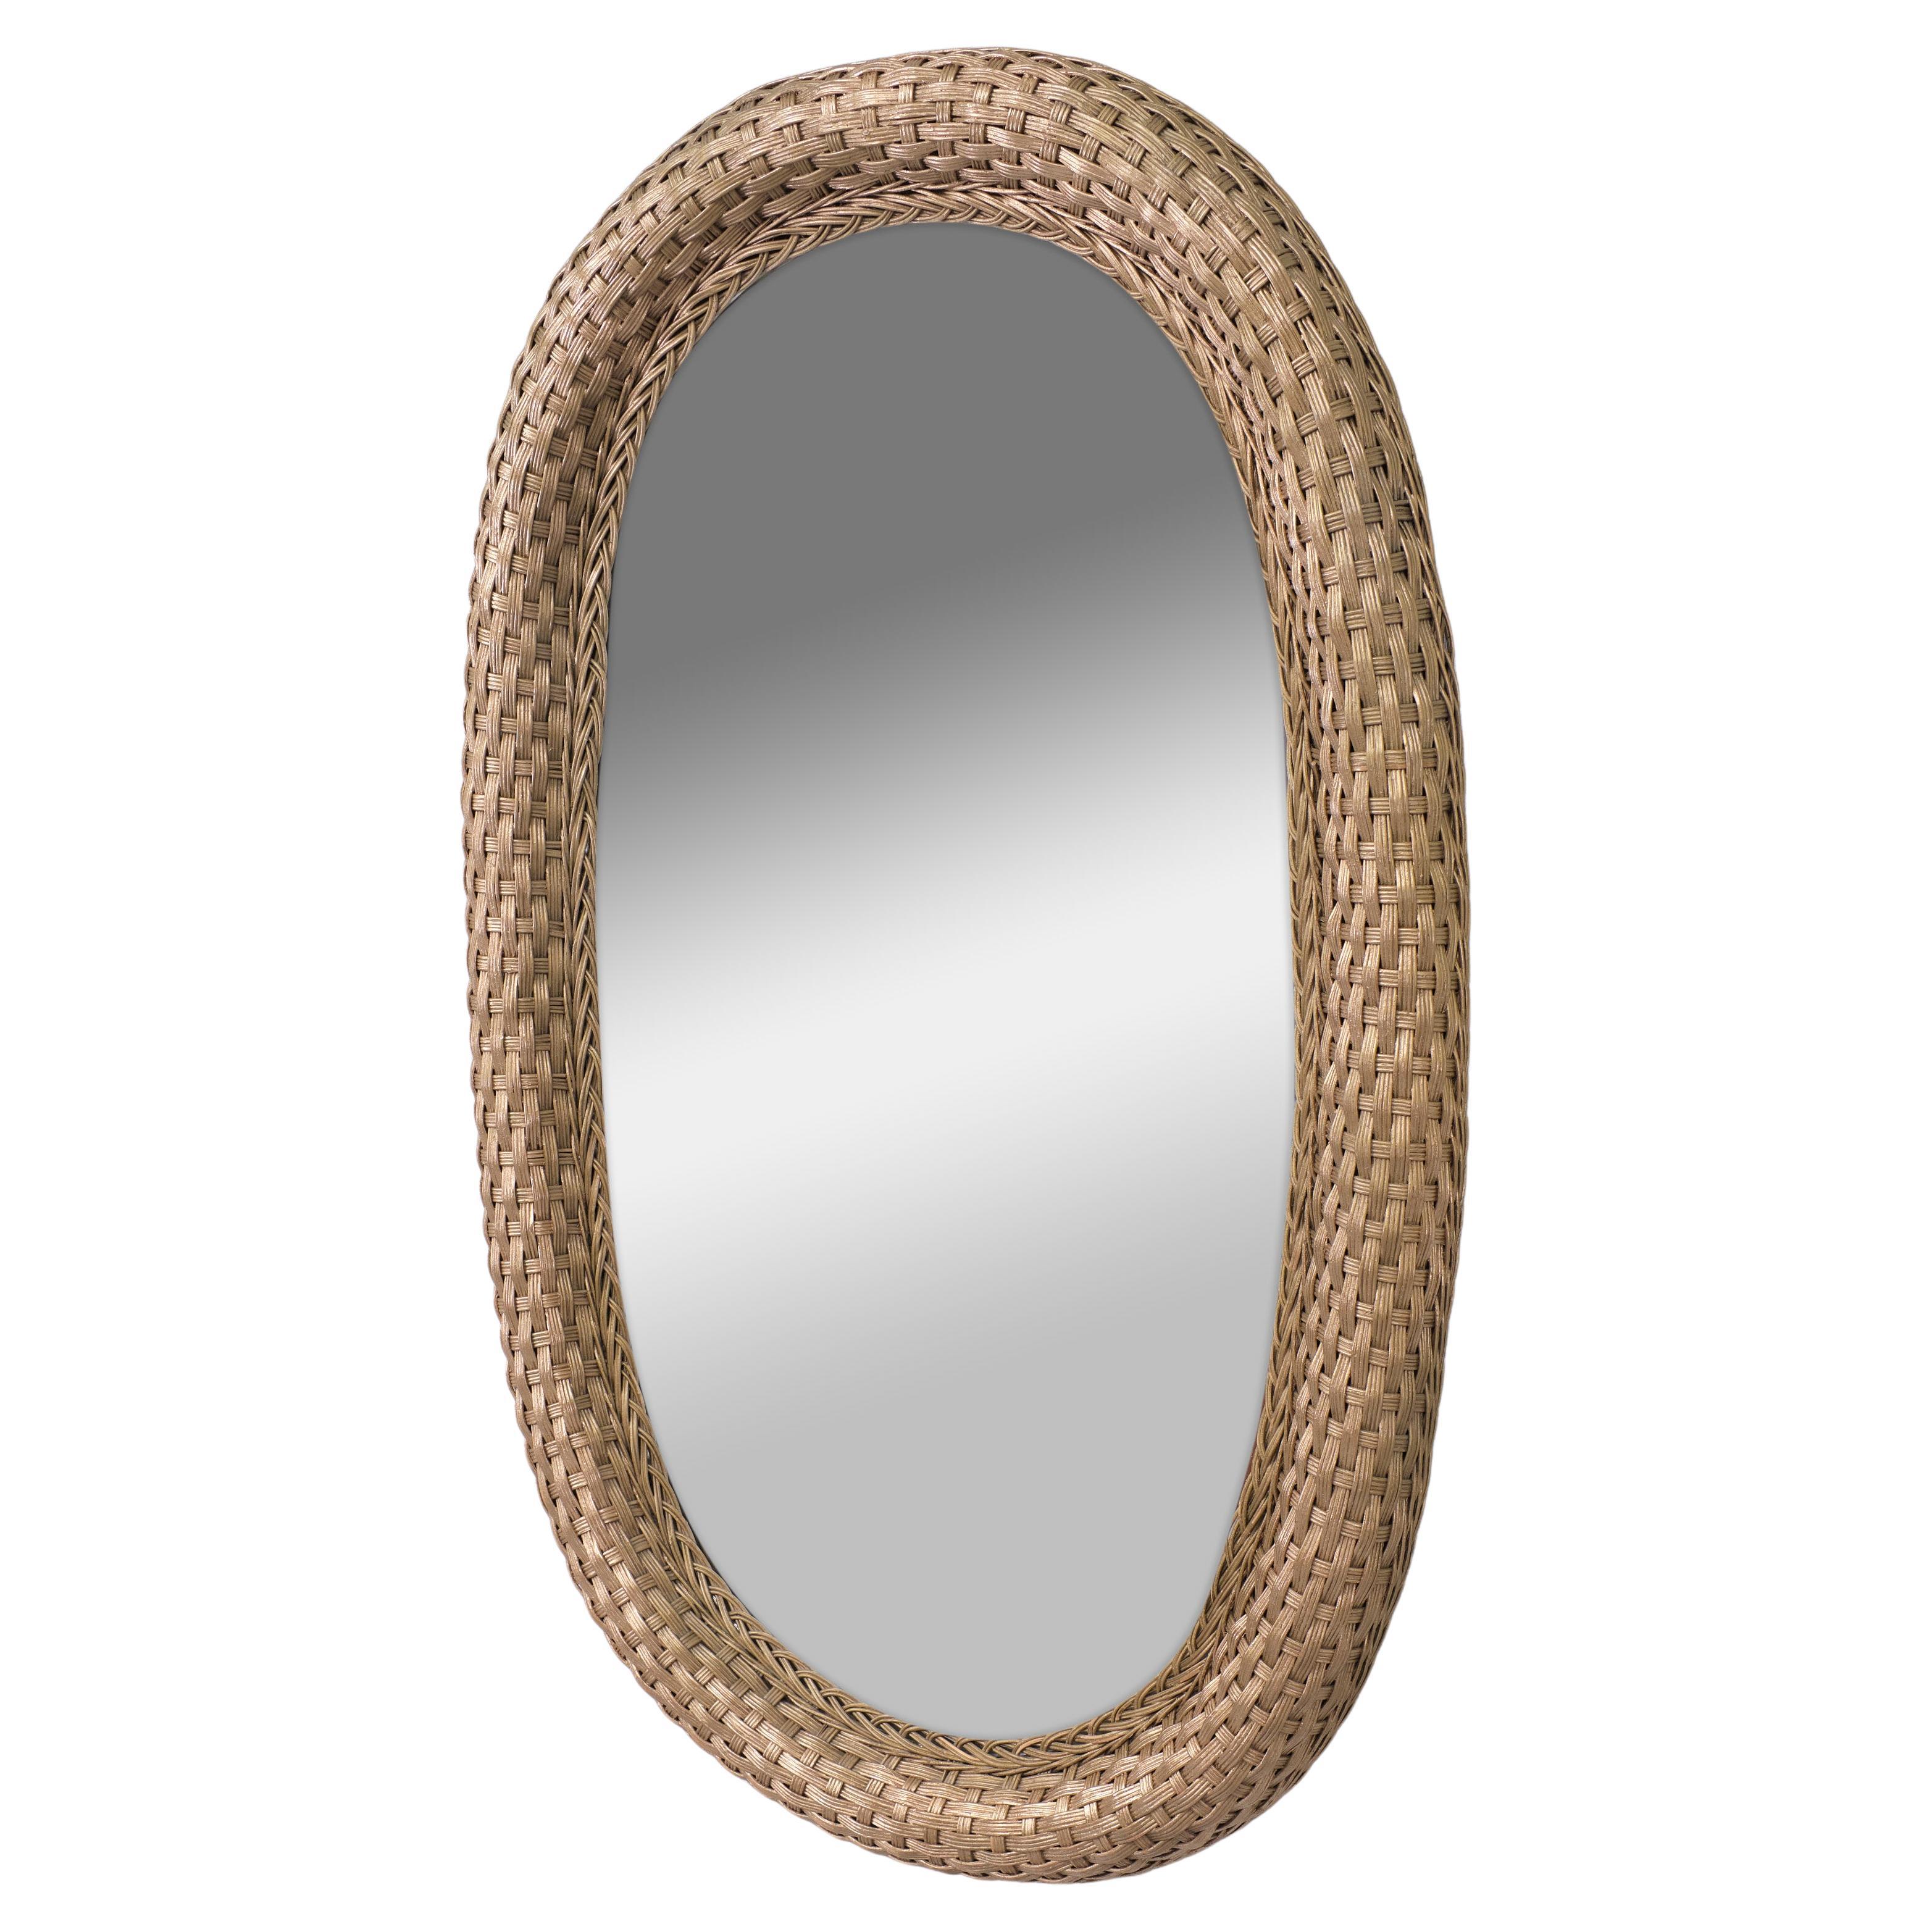 Very nice Bohemian Chic Wall Mirror . Gold Color Wicker .Oval shaped .
Handcrafted . 1960s Holland 

Please don't hesitate to reach out for alternative shipping quotes